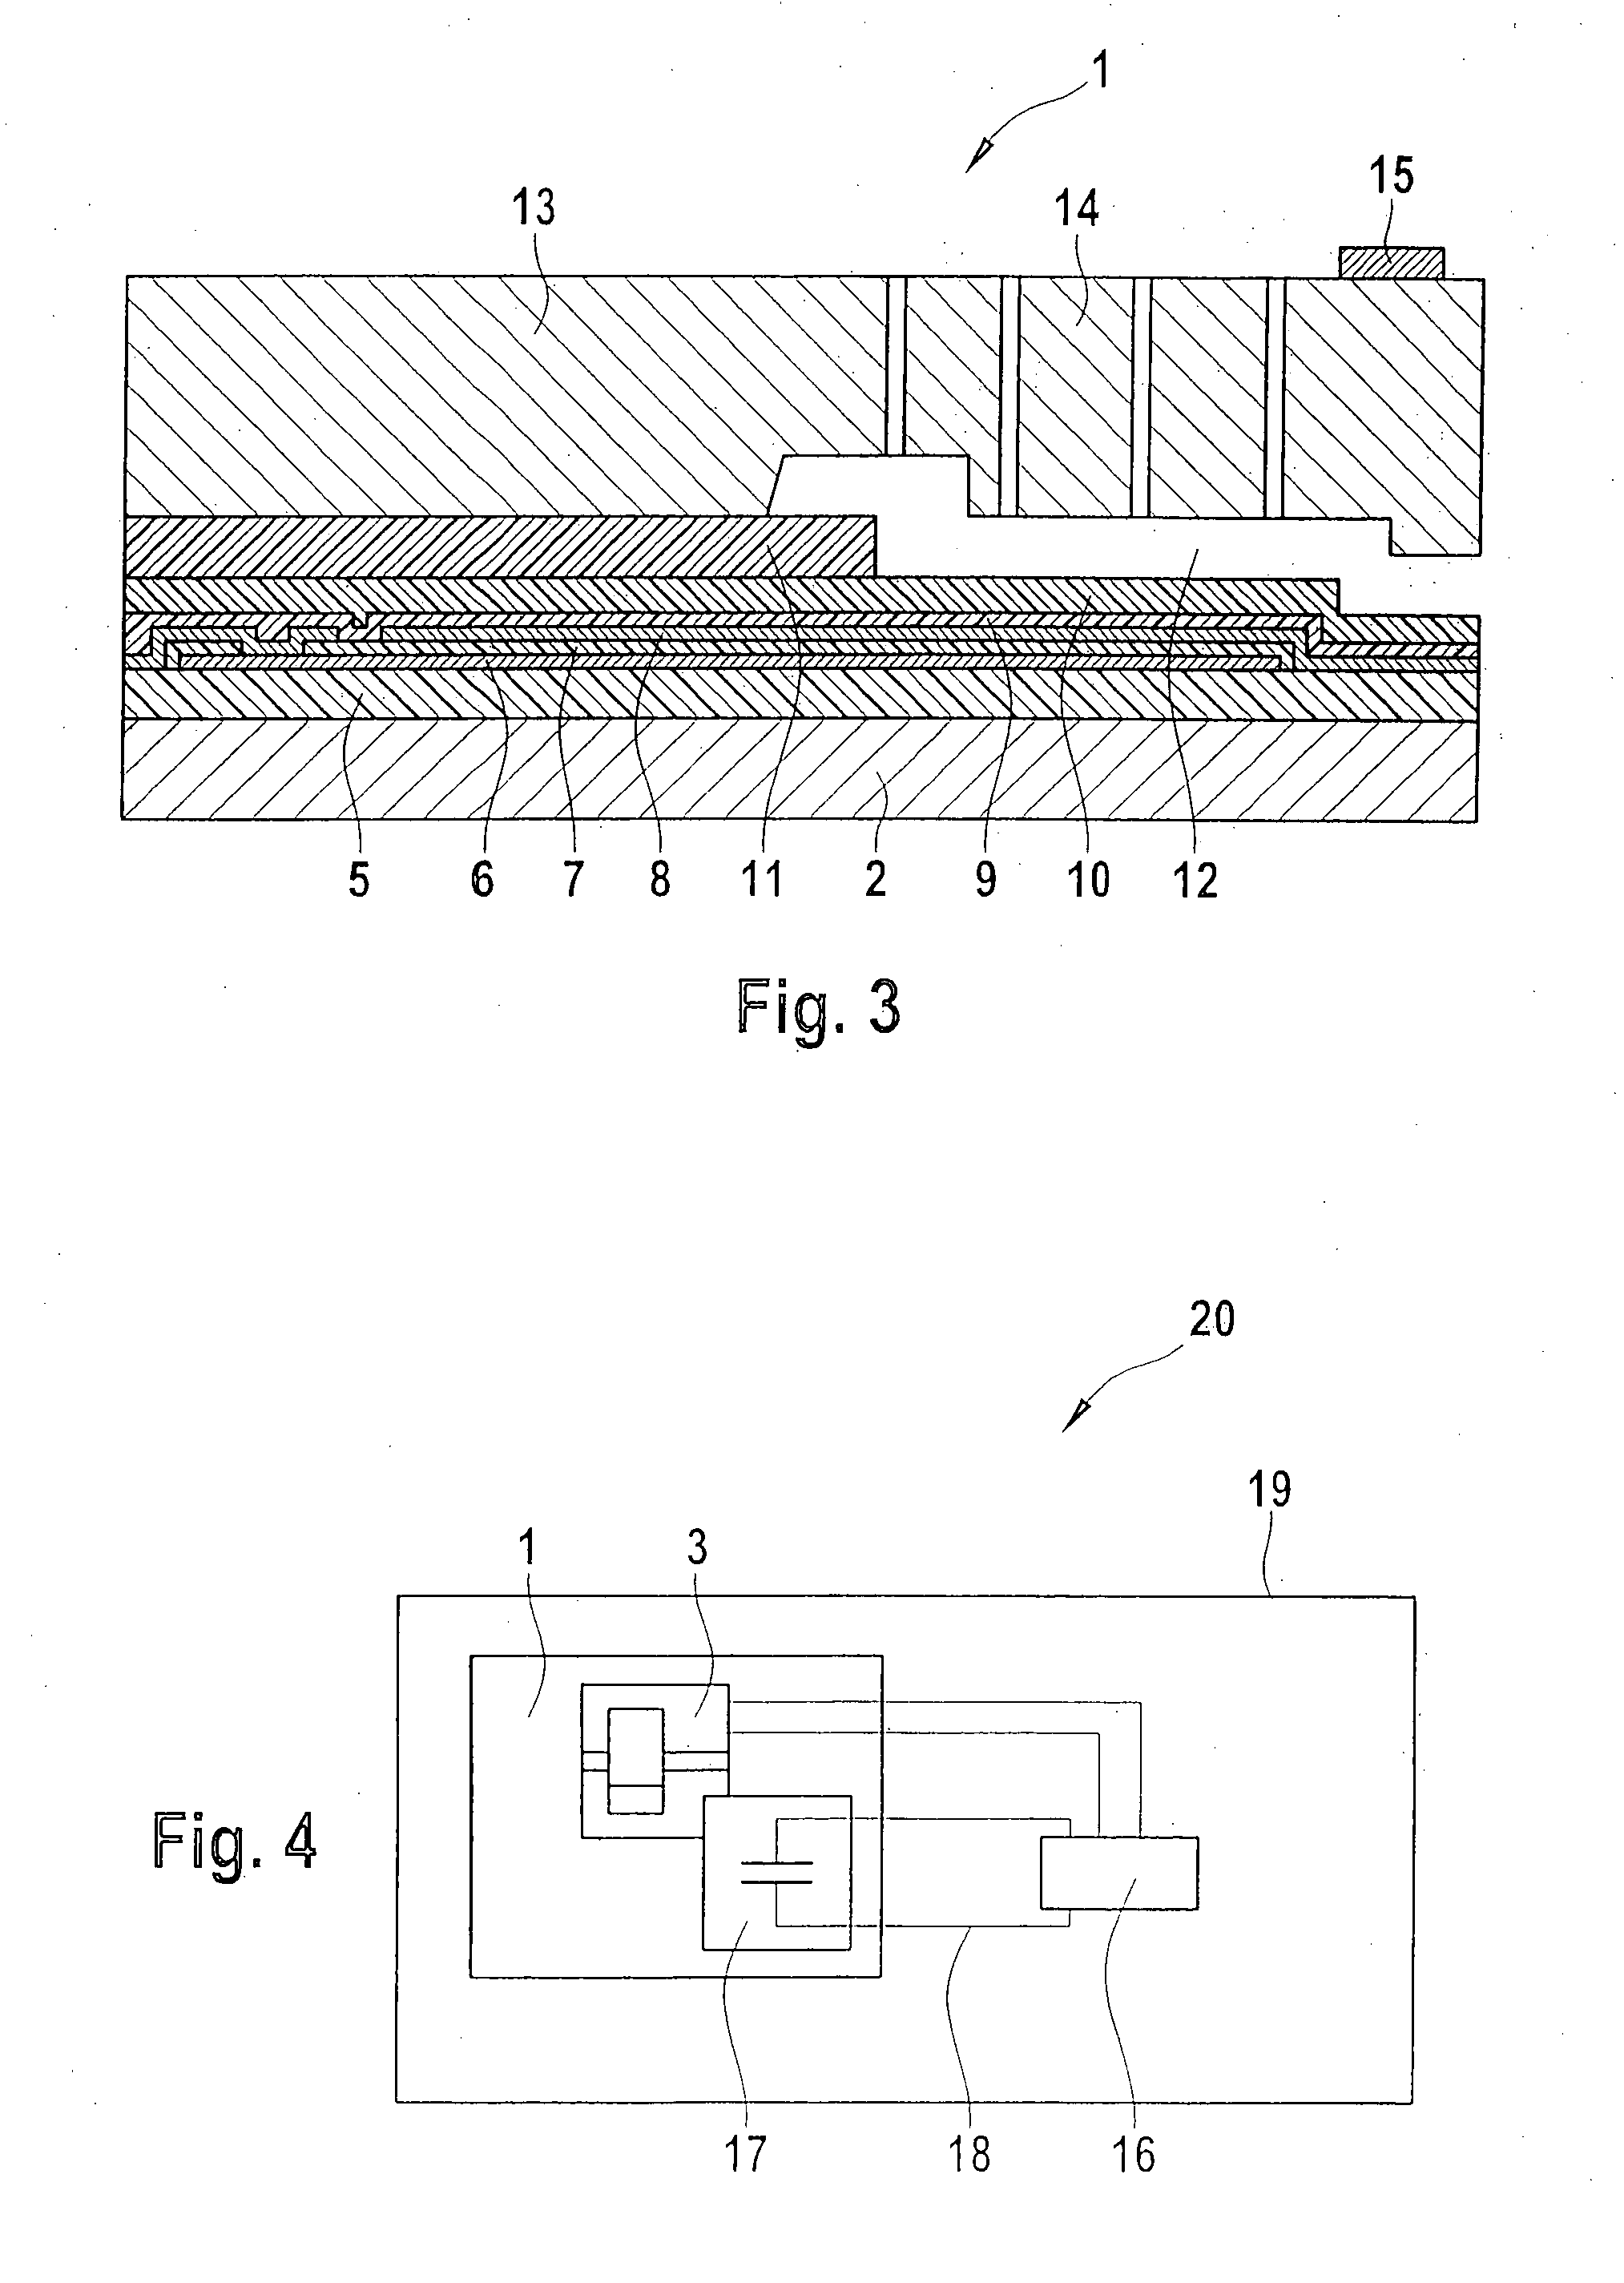 Micromechanical component having integrated passive electronic components and method for its production